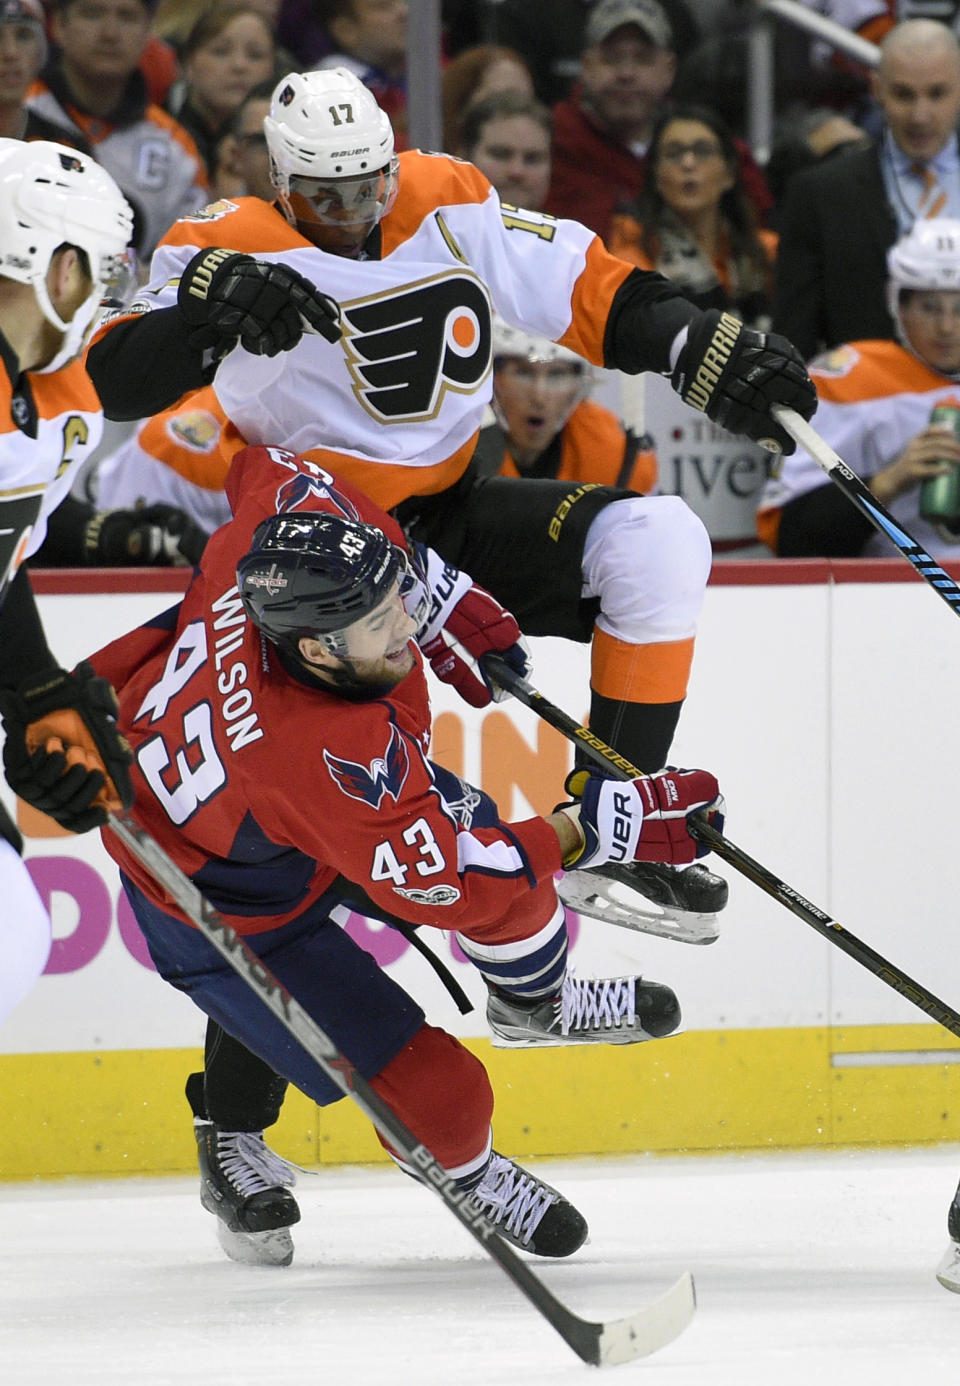 Philadelphia Flyers right wing Wayne Simmonds, top, collides with Washington Capitals right wing Tom Wilson (43) during the second period of an NHL hockey game, Sunday, Jan. 15, 2017, in Washington. (AP Photo/Nick Wass)